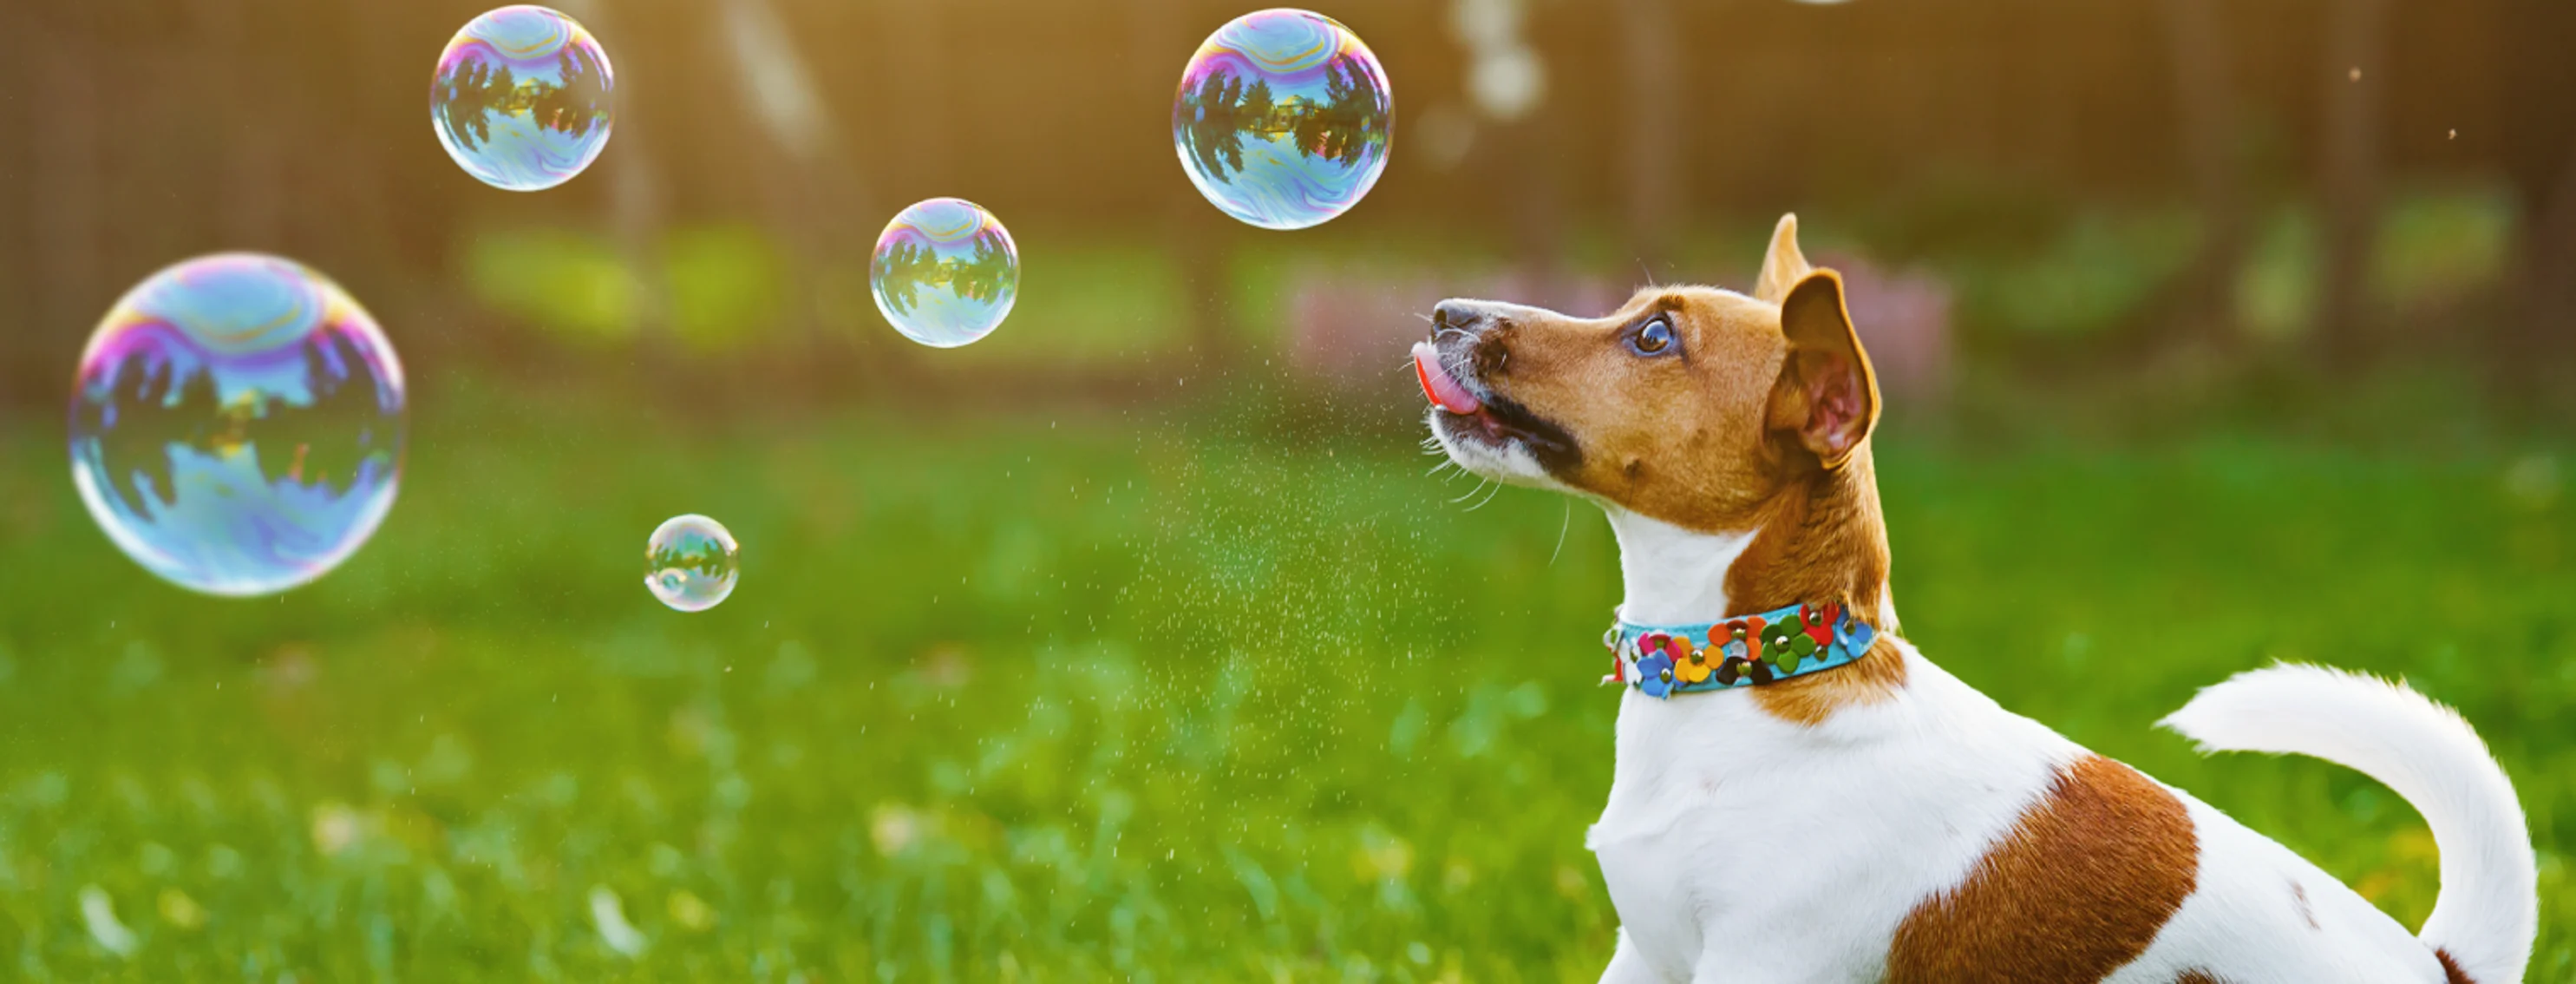 Dog looking at bubbles in grass